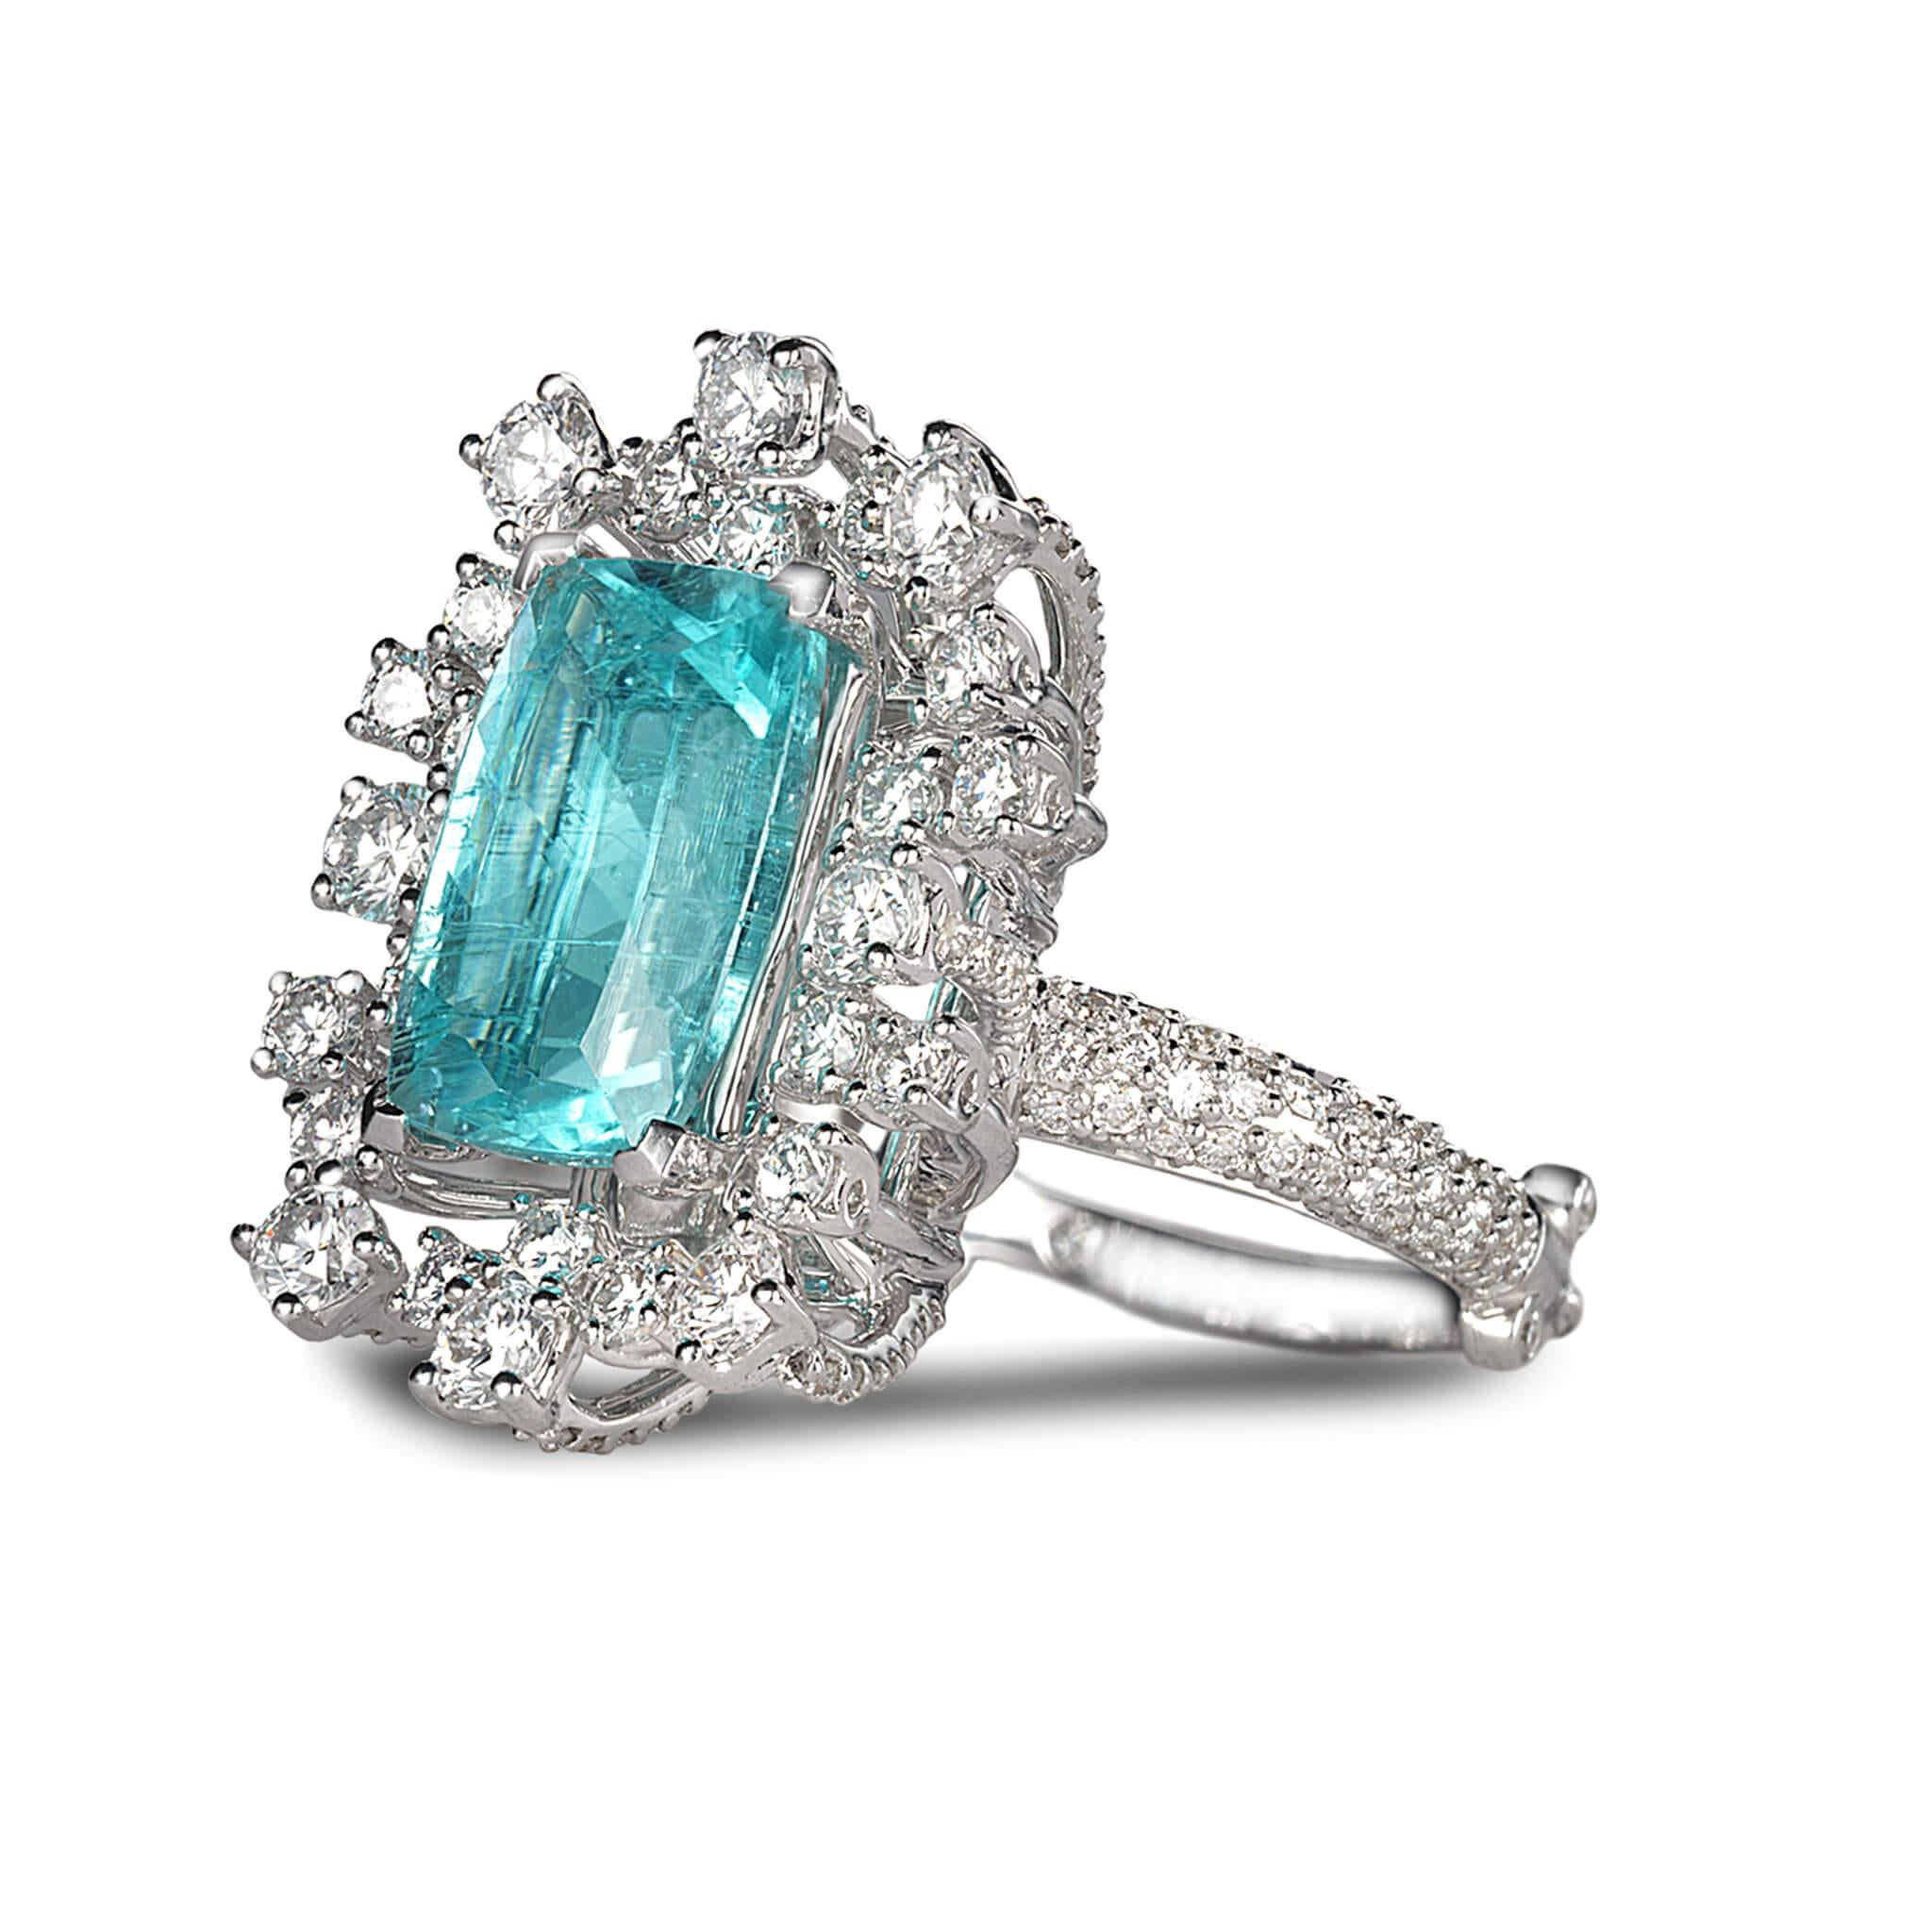 Trinity star burst ring set in 18K white gold with 4.68cts paraiba tourmaline and 2.83cts diamond. Ring size 7.
